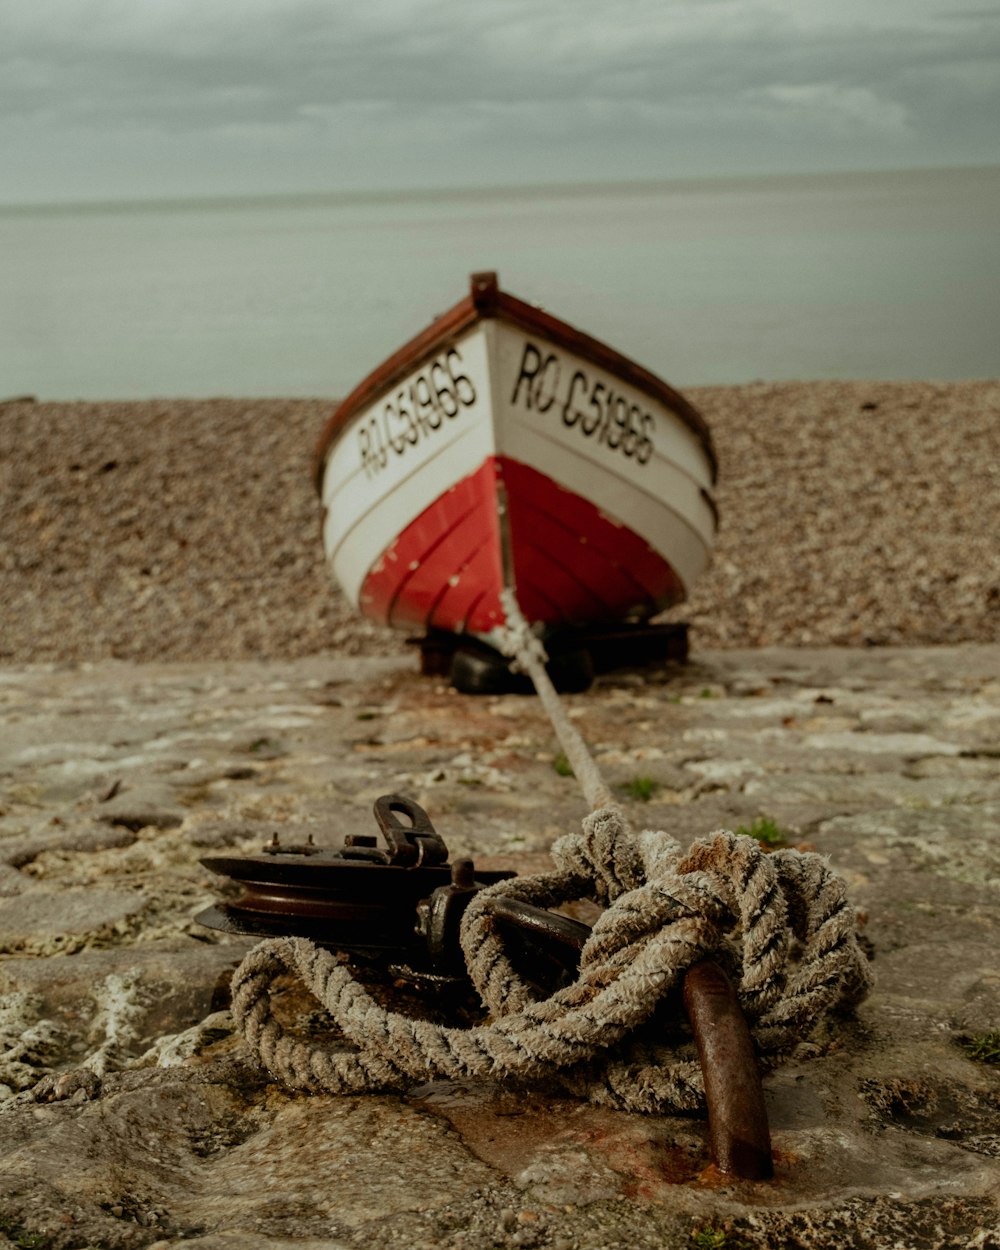 a boat on the beach